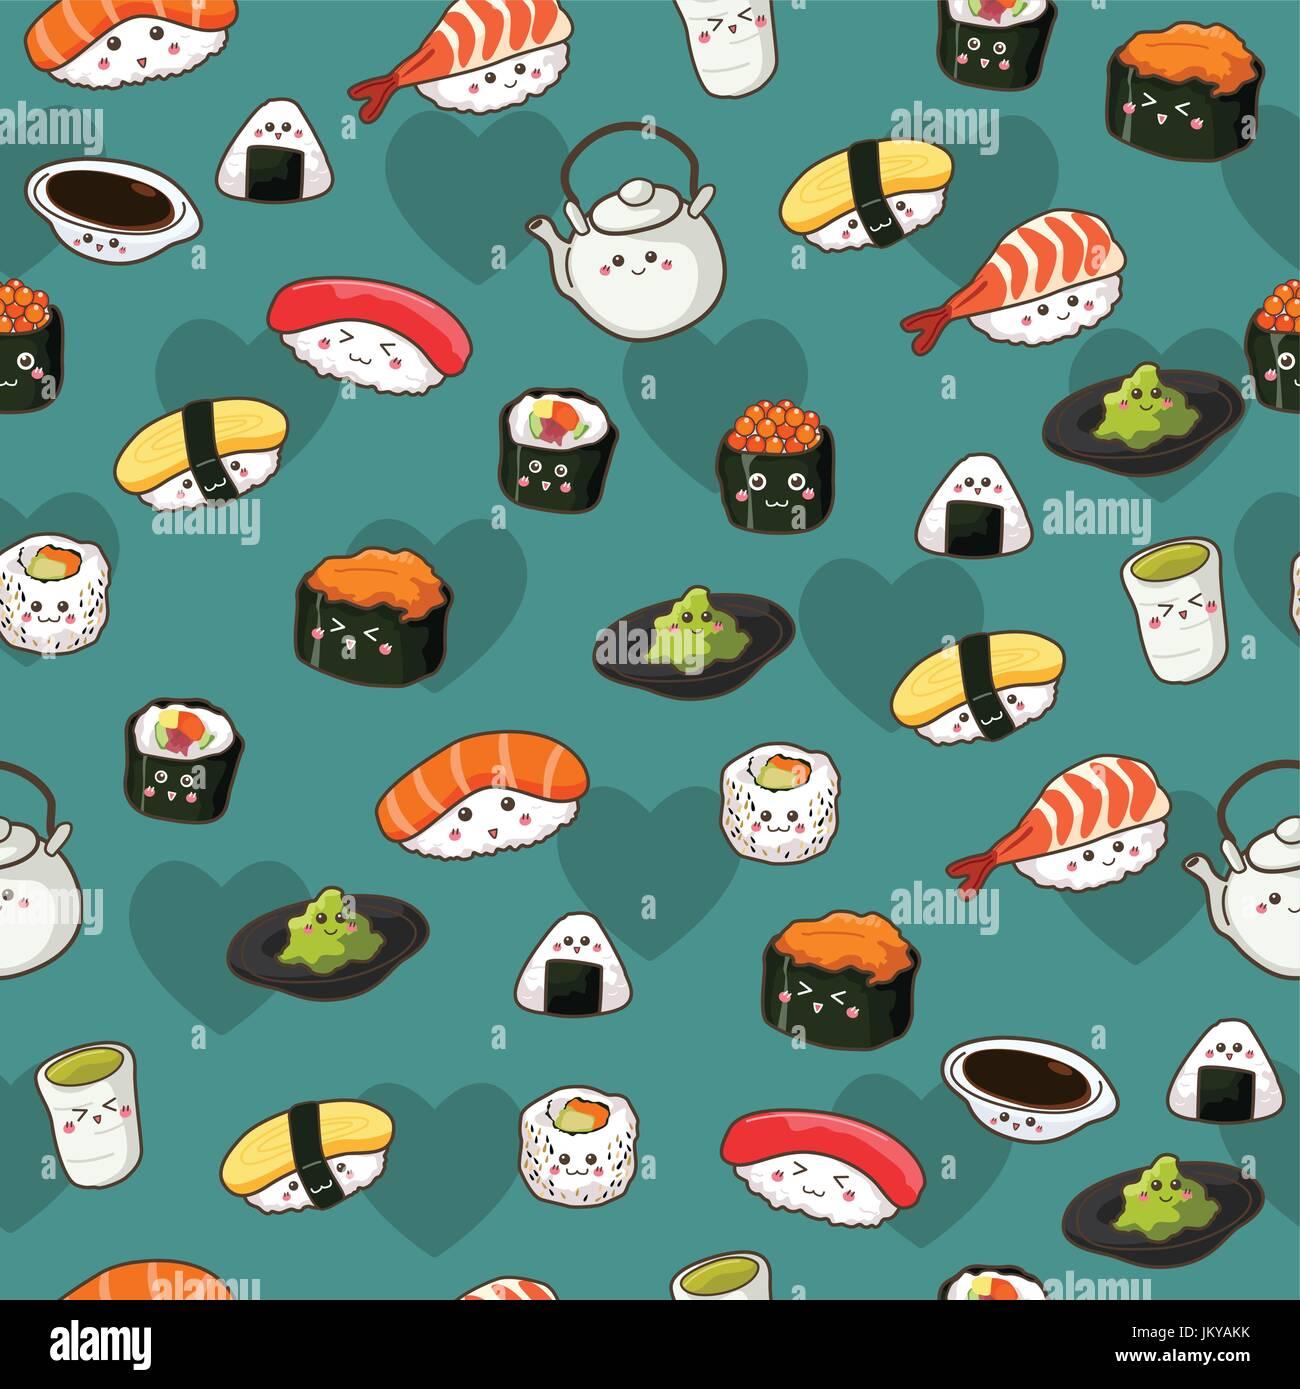 A Vector Illustration Of Seamless Sushi Pattern Wallpaper